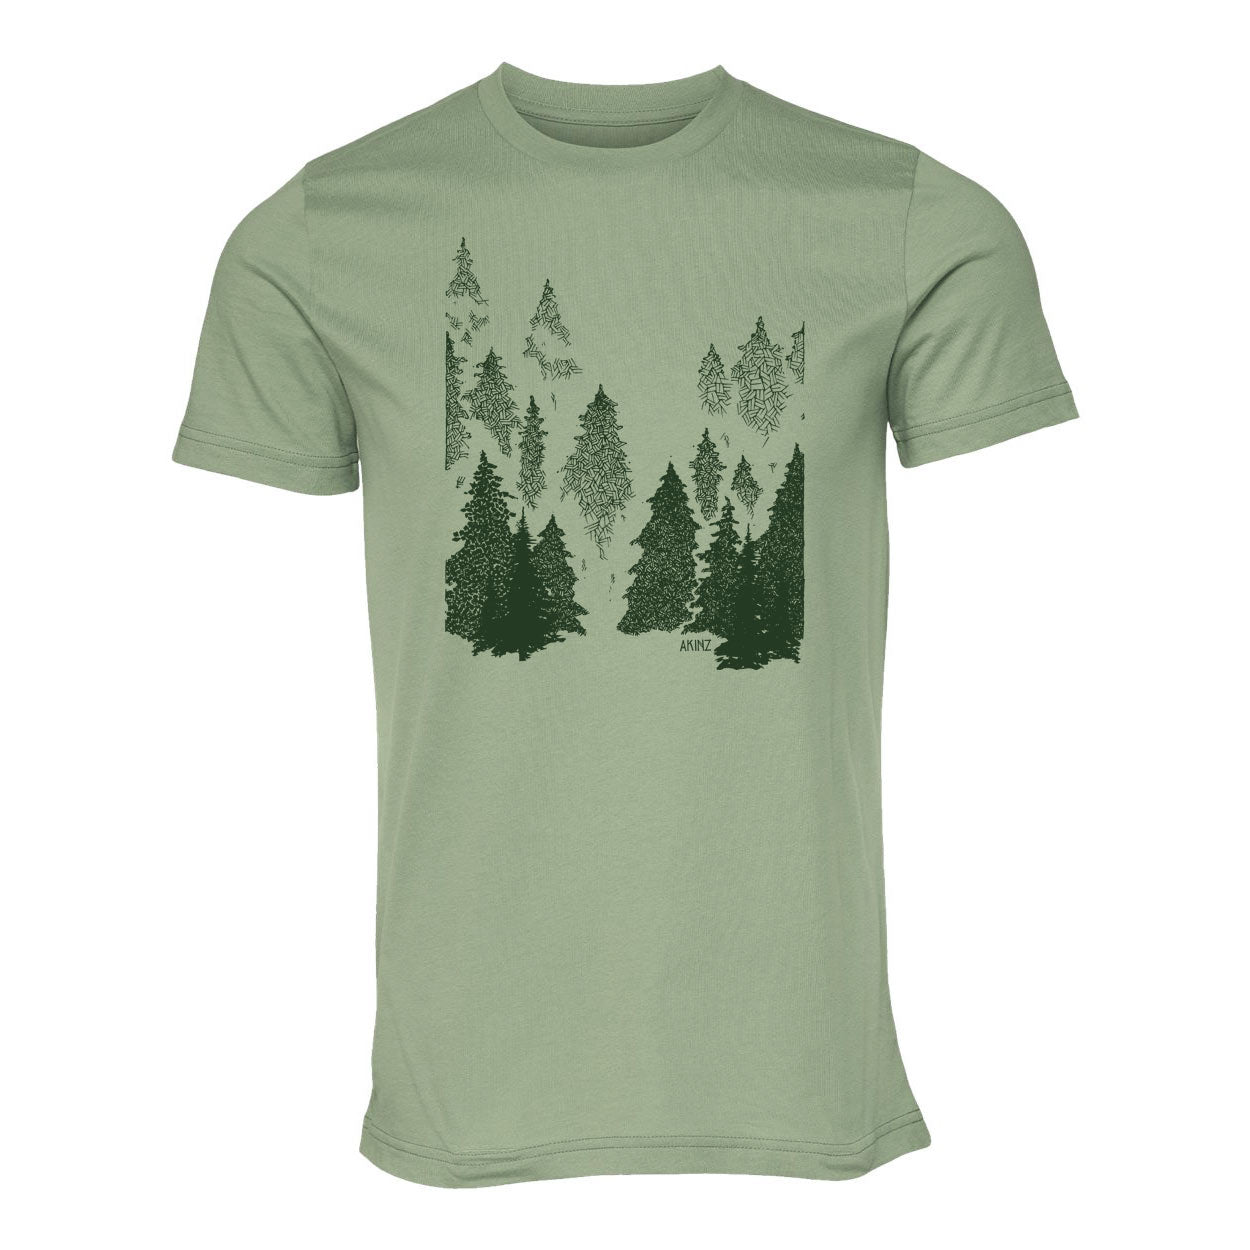 Into the Evergreen Tee